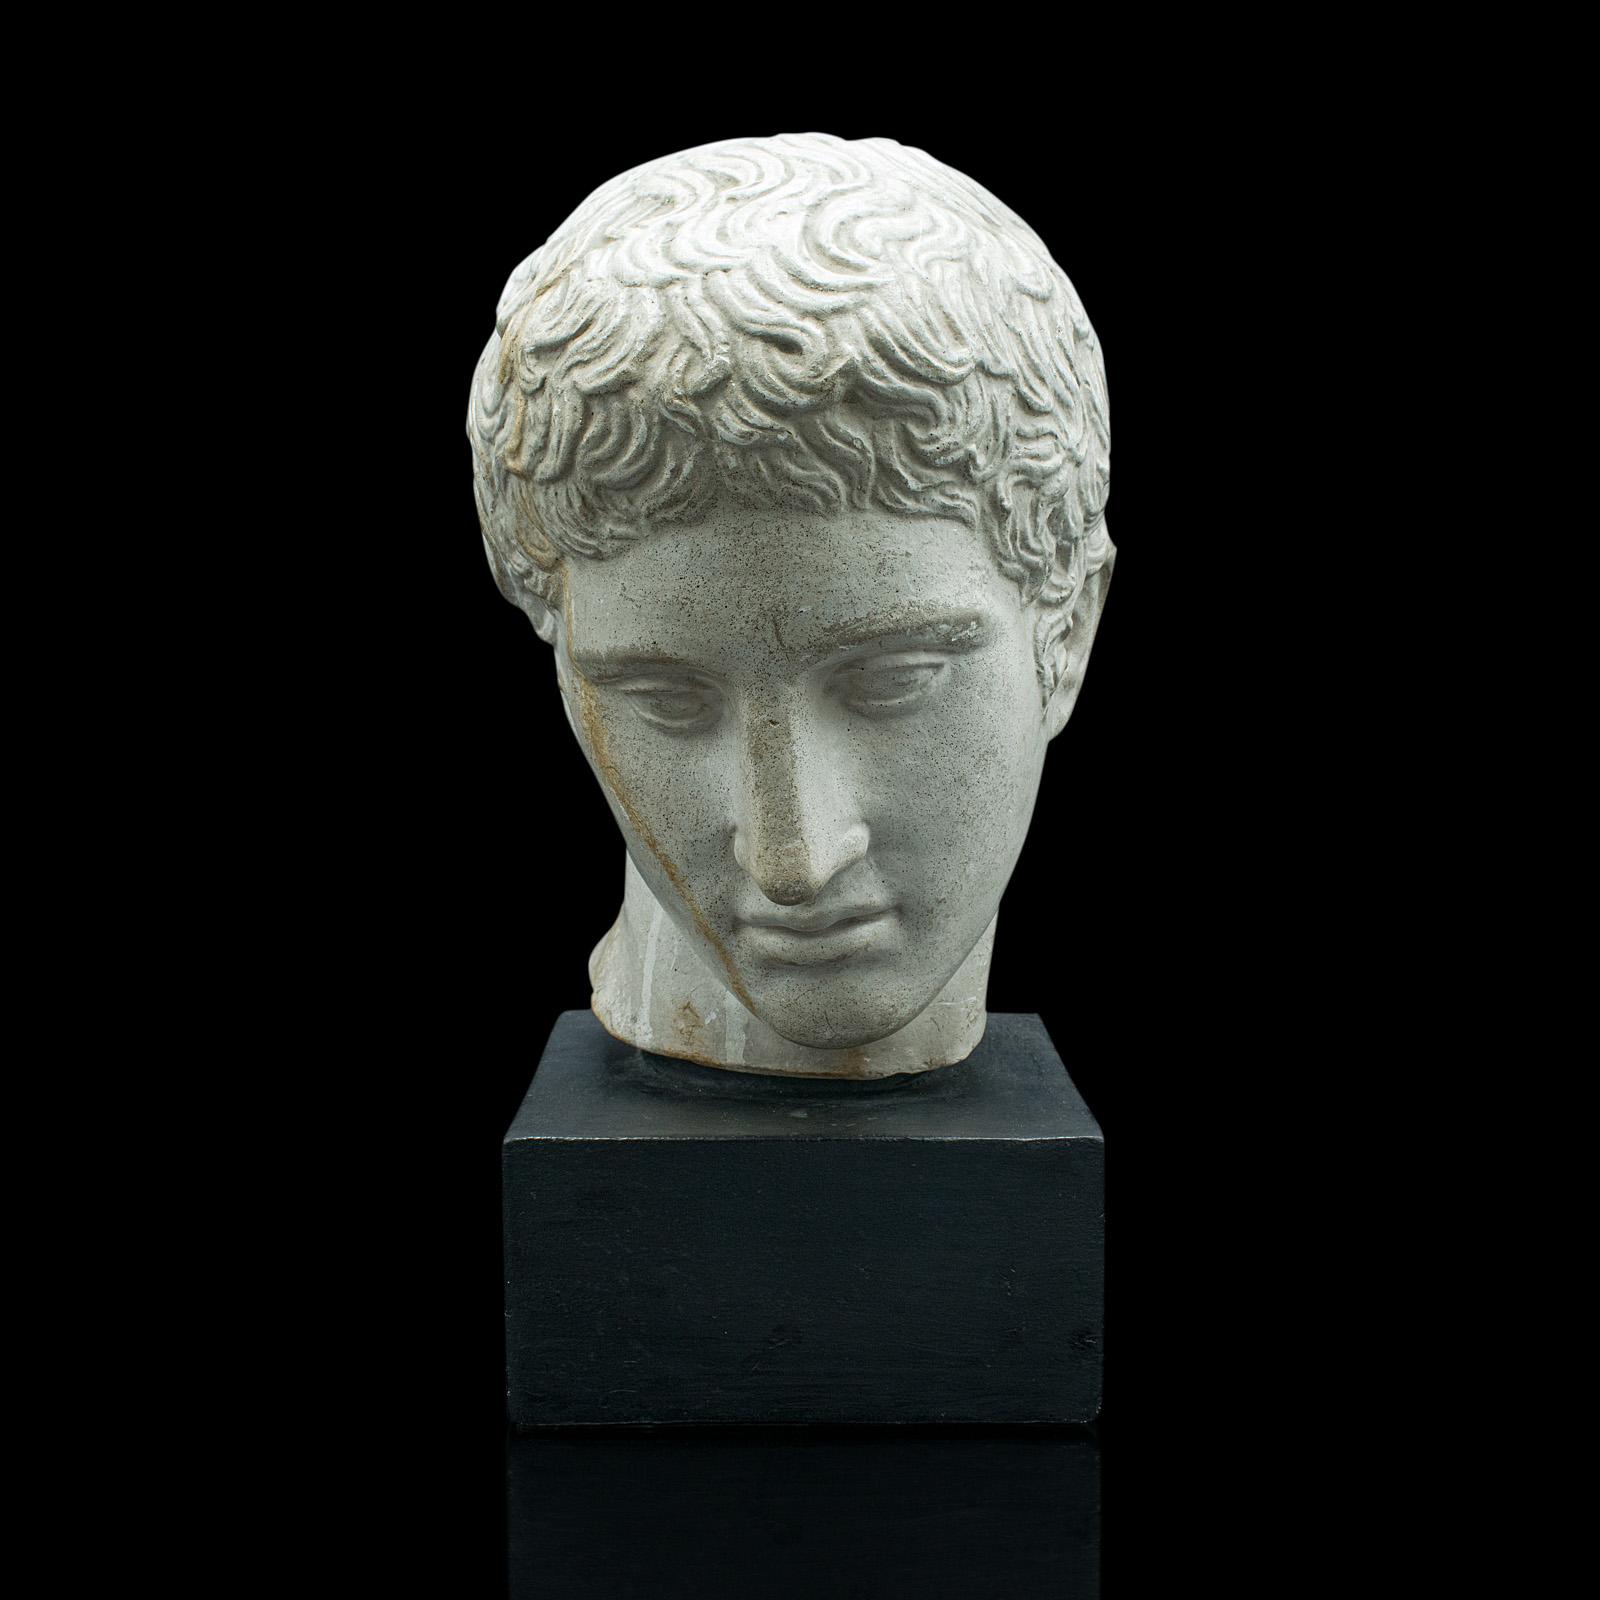 This is an antique male portrait bust. An Italian, plaster figure after Doryphorus by Polykleitos, dating to the late Victorian period, circa 1900.

A classic Roman sculpture, the Doryphorus or Spear-bearer is a later copy of the original bronze by